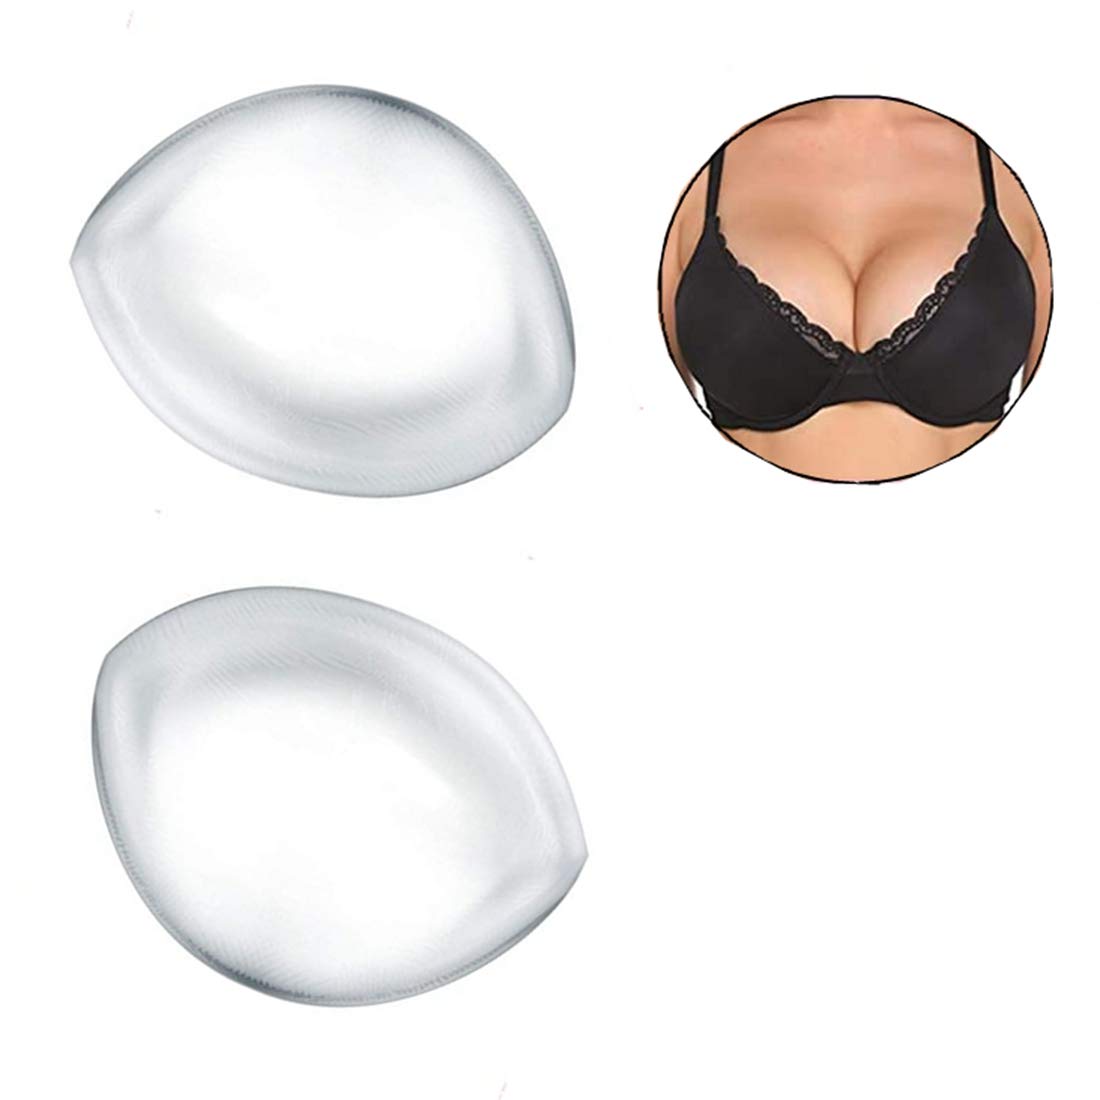 Silicone Bra Inserts Waterproof Push up bra Pad silicone inserts for Under  Bra –